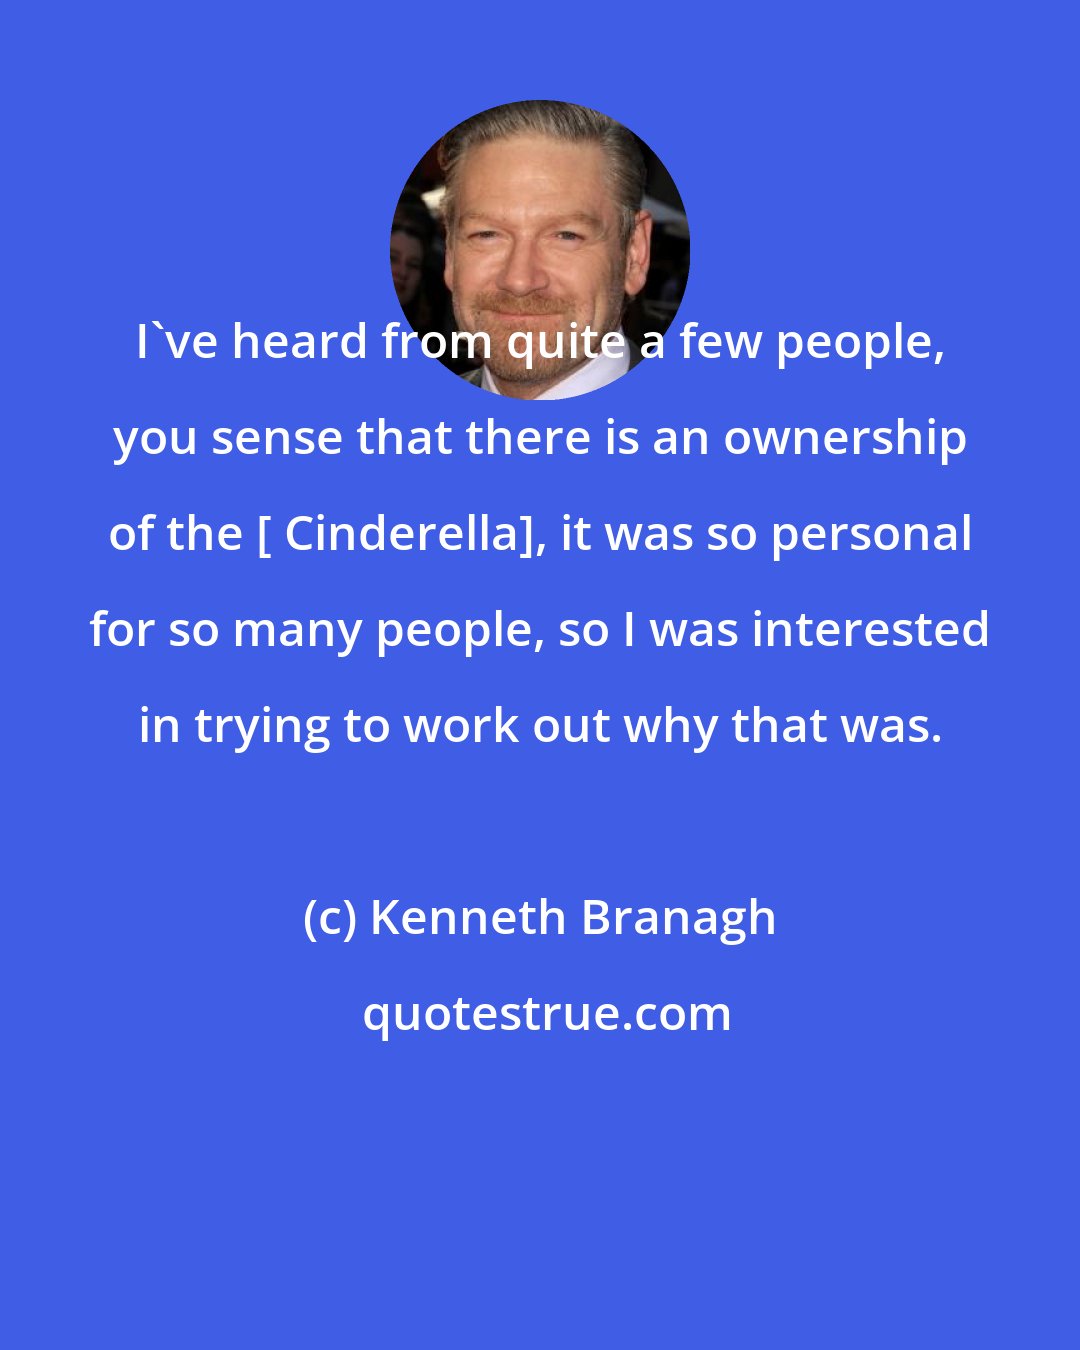 Kenneth Branagh: I've heard from quite a few people, you sense that there is an ownership of the [ Cinderella], it was so personal for so many people, so I was interested in trying to work out why that was.